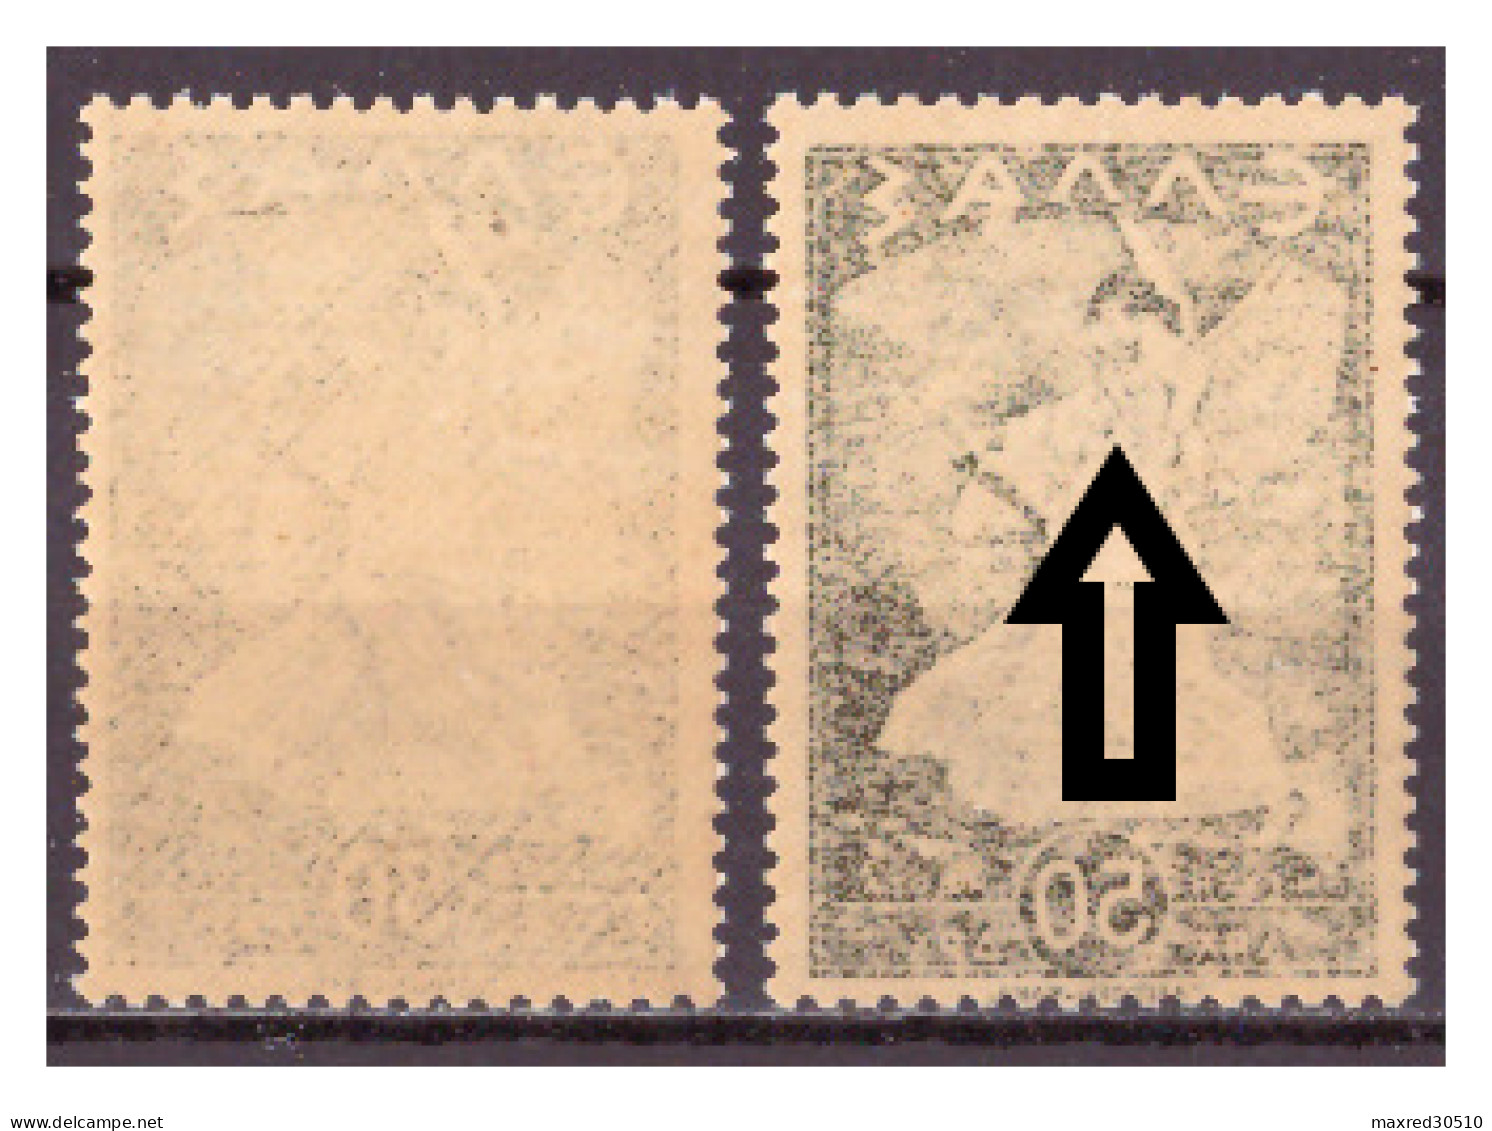 GREECE 1945 2X50L. OF THE "GLORY ISSUE" THE 2ND ONE (SEE ARROWS) WITH MIRROR PRINTING AT THE GUM ERROR MNH - Plaatfouten En Curiosa